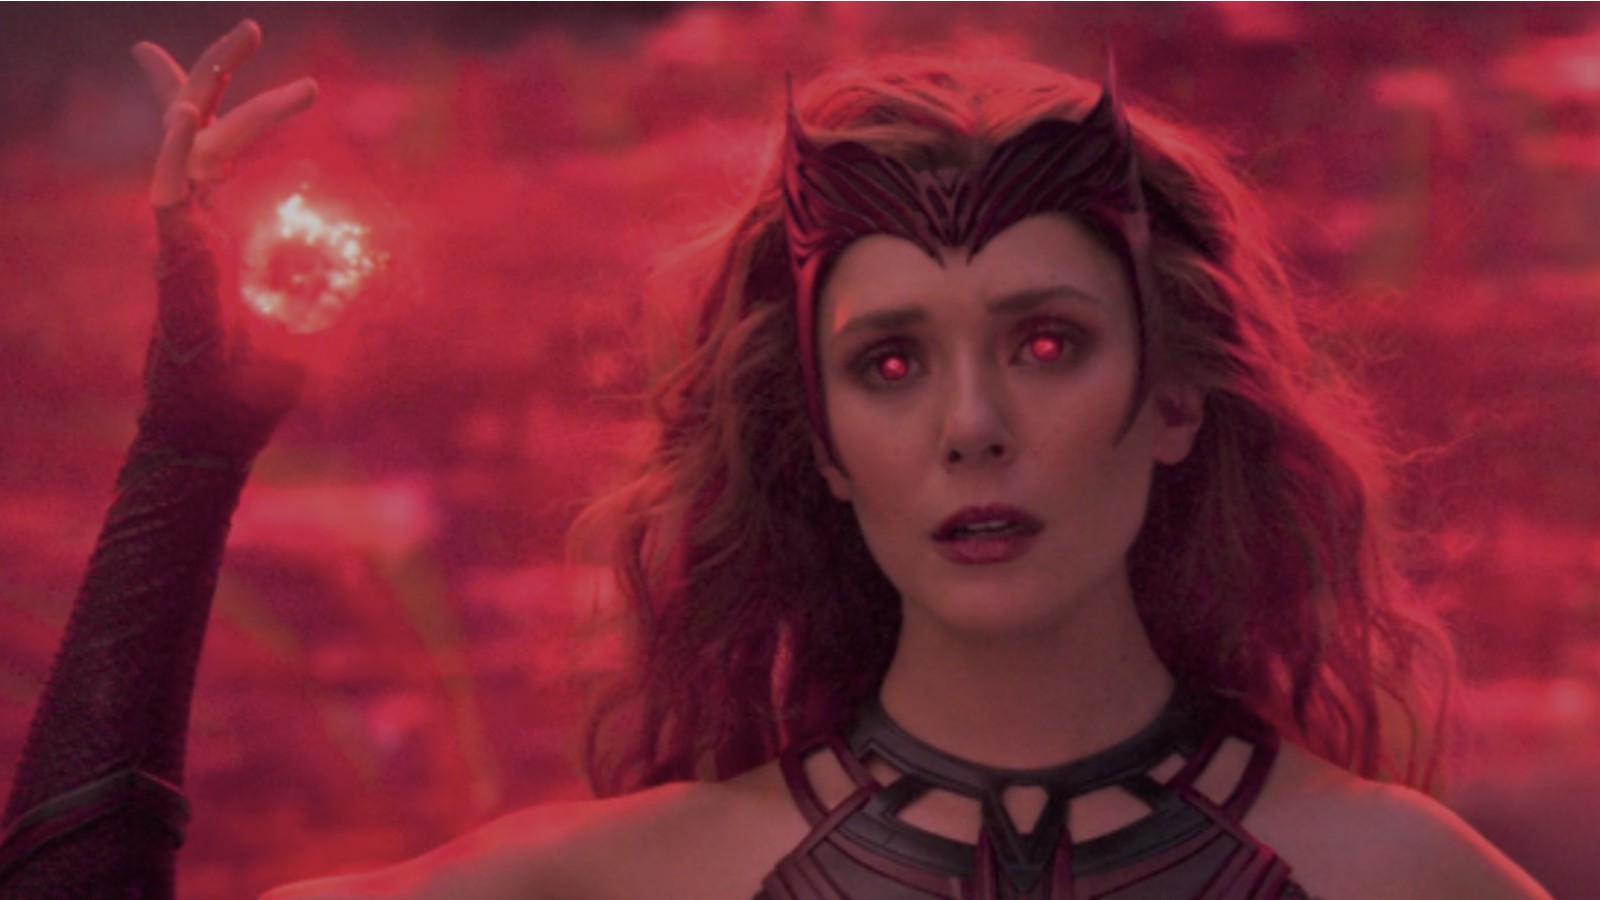 Marvel fans are asking for a Scarlet Witch movie after Elizabeth Olsen’s ‘What If’ cameo